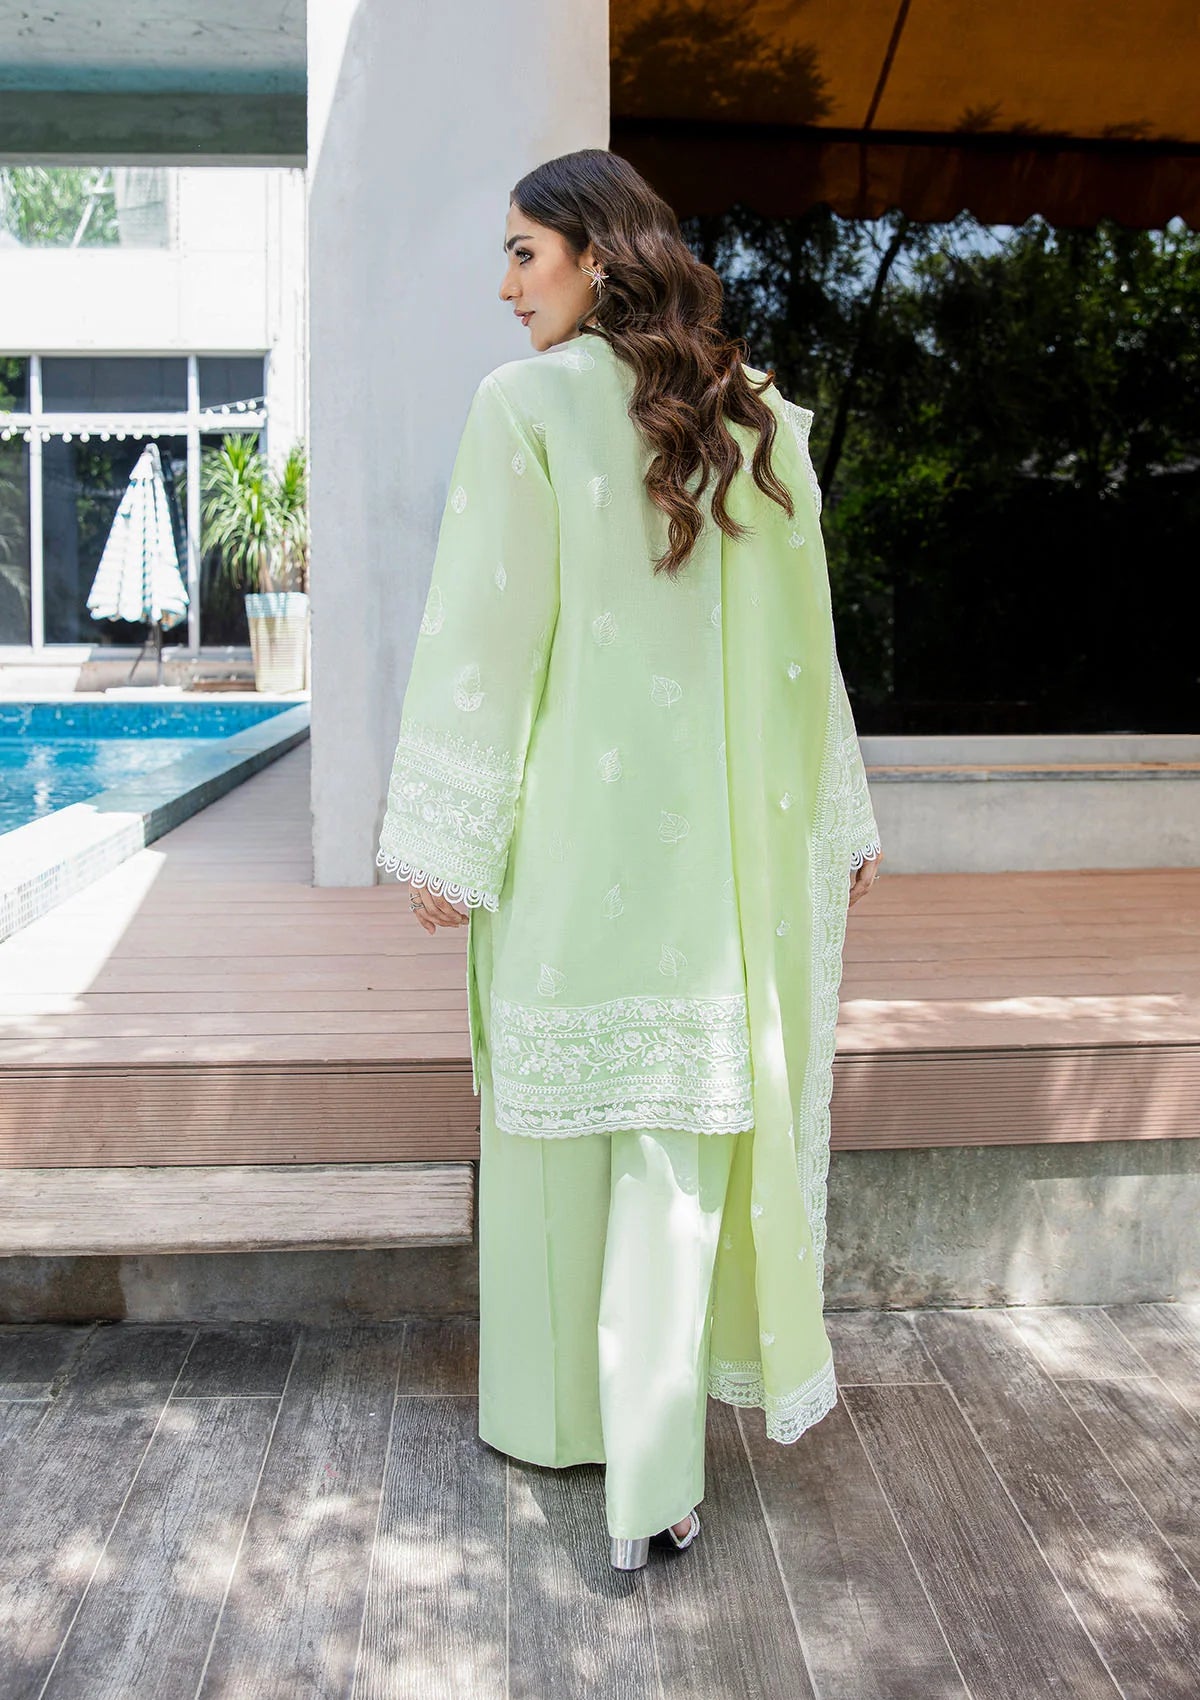 Buy Now, LOOK 2B - AIK Lawn'23 - Vol. 2 - Shahana Collection UK - Wedding and Bridal Party Dresses - Aik Atelier 